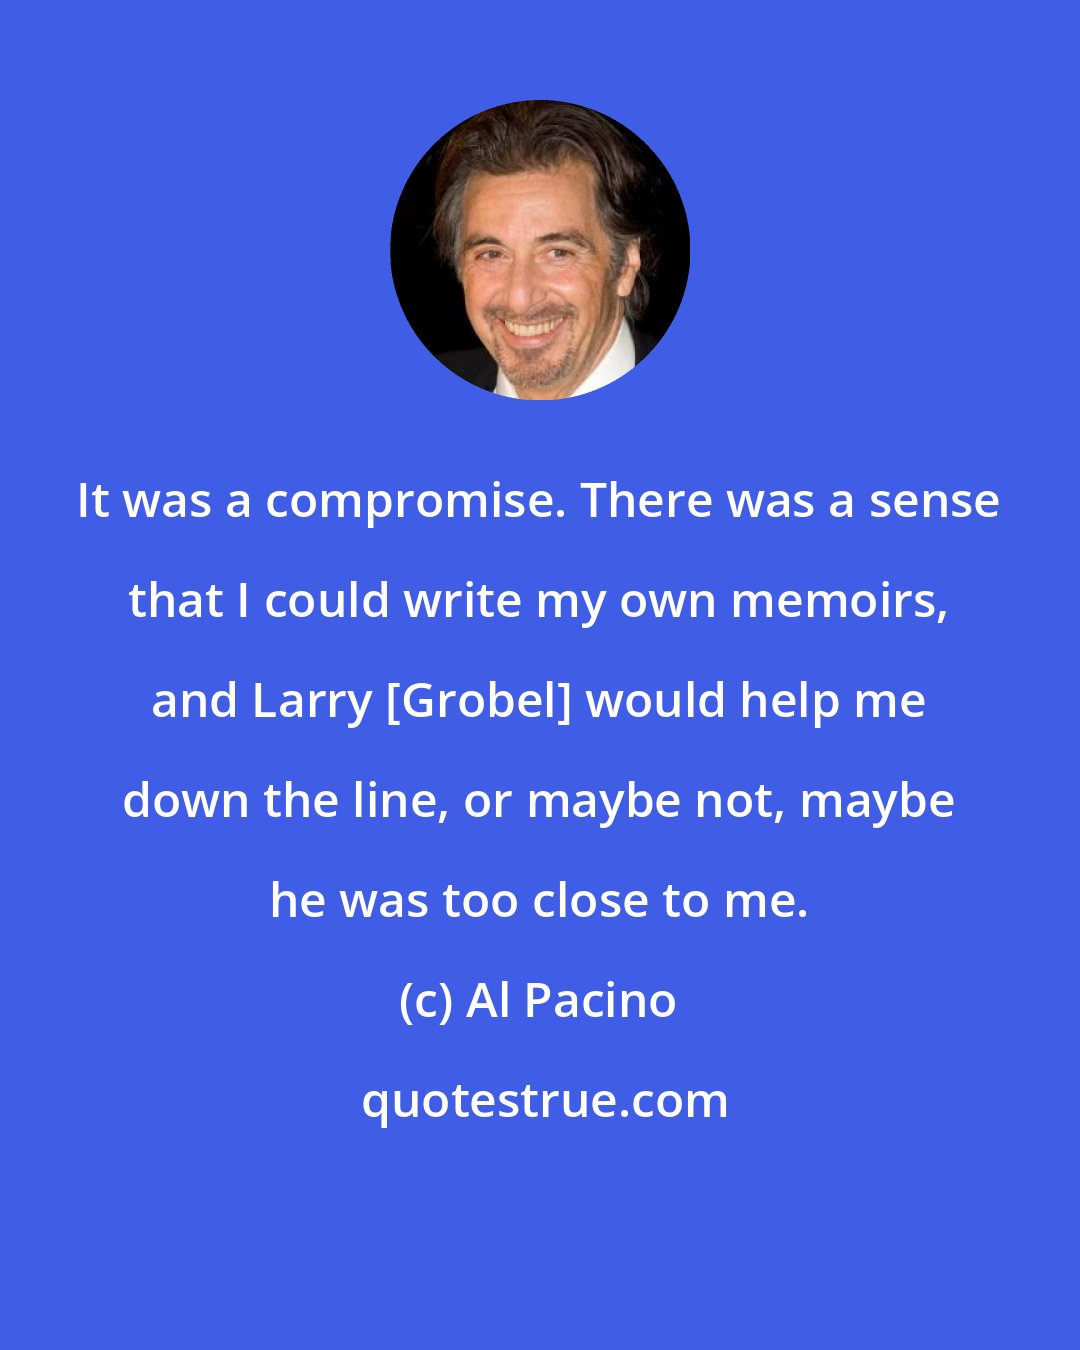 Al Pacino: It was a compromise. There was a sense that I could write my own memoirs, and Larry [Grobel] would help me down the line, or maybe not, maybe he was too close to me.